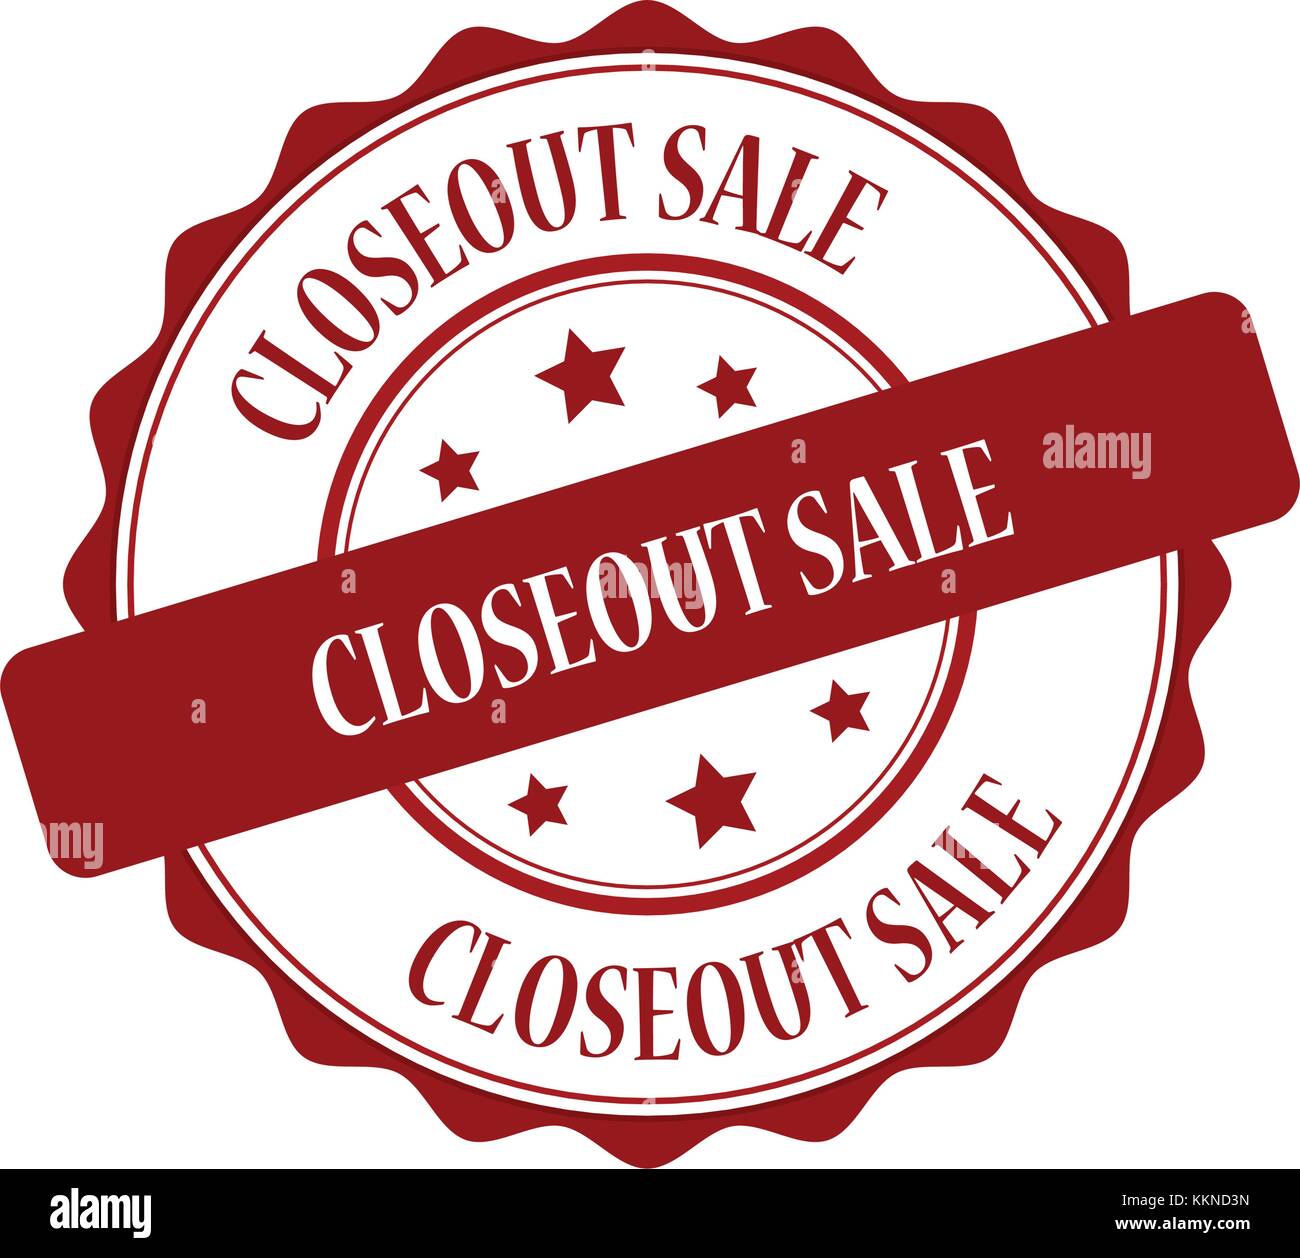 Closeout, Clearance & Demos